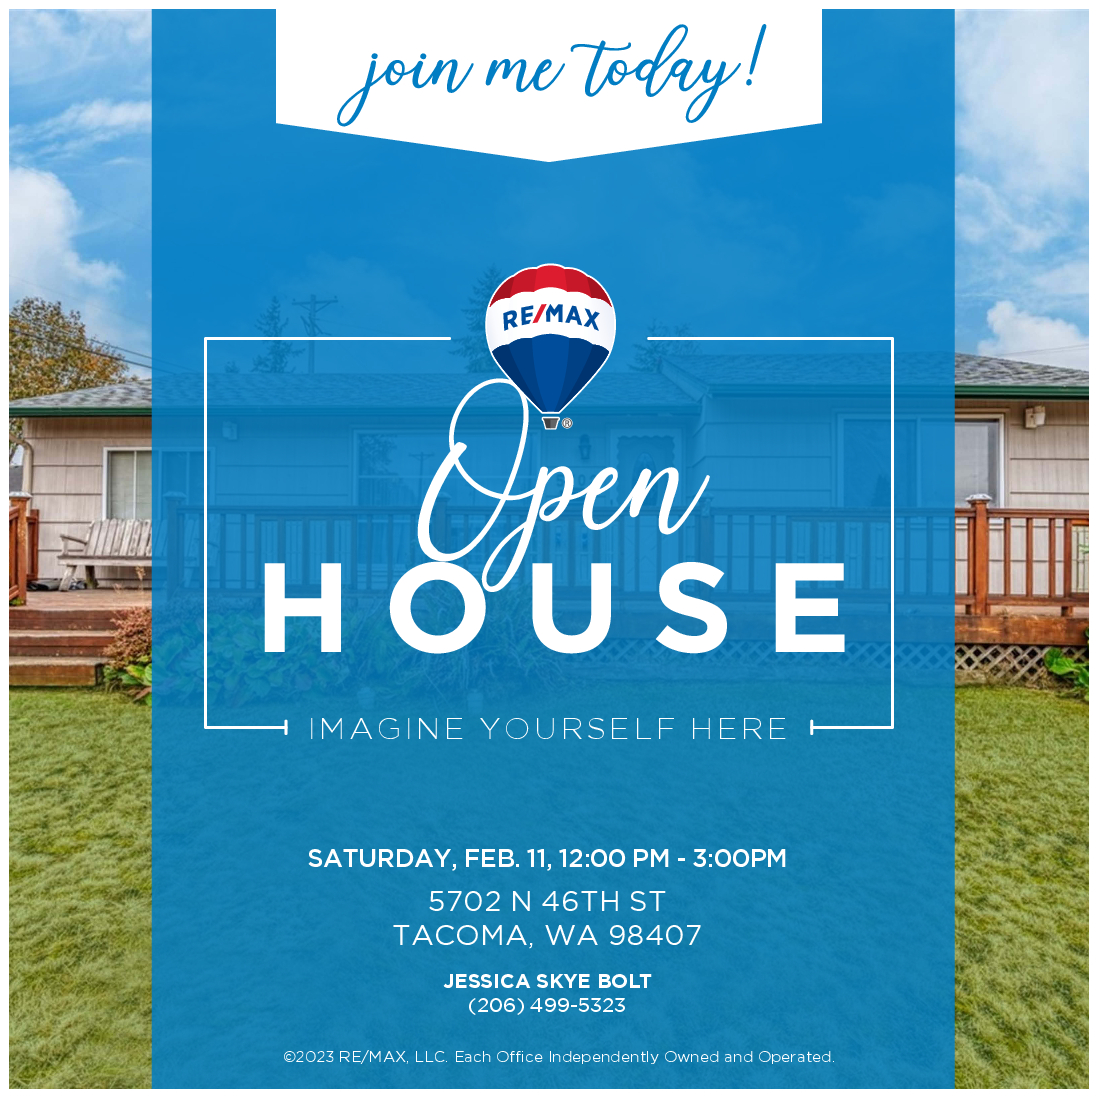 ✨Open House✨
⏰ Saturday, February 11th, 12:00-3:00 PM
📍5702 N 46th St, Tacoma, WA 98407

#openhouse #yournewhomeawaitsyou #tacomarealestate #tacomarealtor #tacomarealestateagent #buyahome #justlisted #listings #newlisting #tacoma #realtor #realty #firstimehomebuyer #tacoma